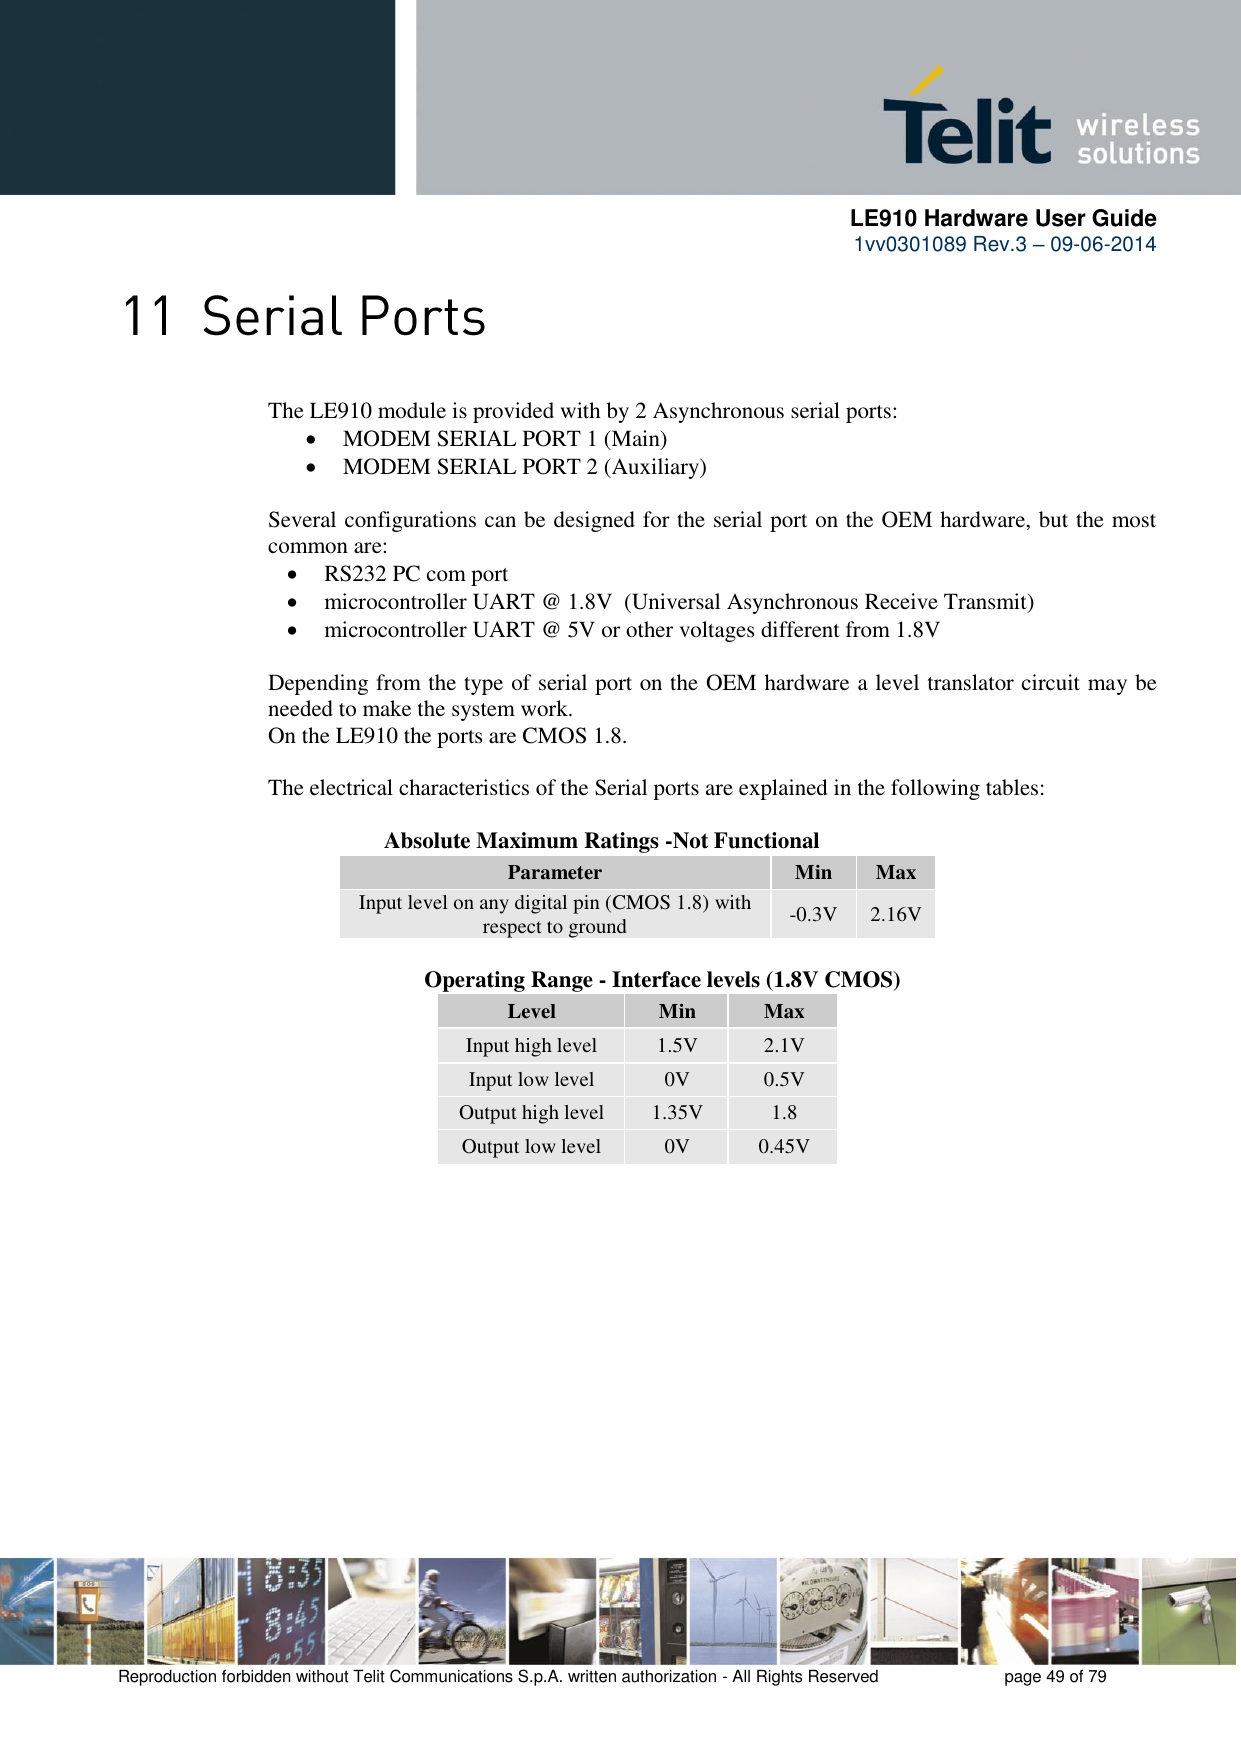      LE910 Hardware User Guide 1vv0301089 Rev.3 – 09-06-2014    Reproduction forbidden without Telit Communications S.p.A. written authorization - All Rights Reserved    page 49 of 79   The LE910 module is provided with by 2 Asynchronous serial ports:  MODEM SERIAL PORT 1 (Main)  MODEM SERIAL PORT 2 (Auxiliary)  Several configurations can be designed for the serial port on the OEM hardware, but the most common are:  RS232 PC com port  microcontroller UART @ 1.8V  (Universal Asynchronous Receive Transmit)   microcontroller UART @ 5V or other voltages different from 1.8V   Depending from the type of serial port on the OEM hardware a level translator circuit may be needed to make the system work.  On the LE910 the ports are CMOS 1.8.  The electrical characteristics of the Serial ports are explained in the following tables:      Absolute Maximum Ratings -Not Functional Parameter Min Max Input level on any digital pin (CMOS 1.8) with respect to ground -0.3V 2.16V              Operating Range - Interface levels (1.8V CMOS) Level Min Max Input high level 1.5V 2.1V Input low level 0V 0.5V Output high level 1.35V 1.8 Output low level 0V 0.45V  